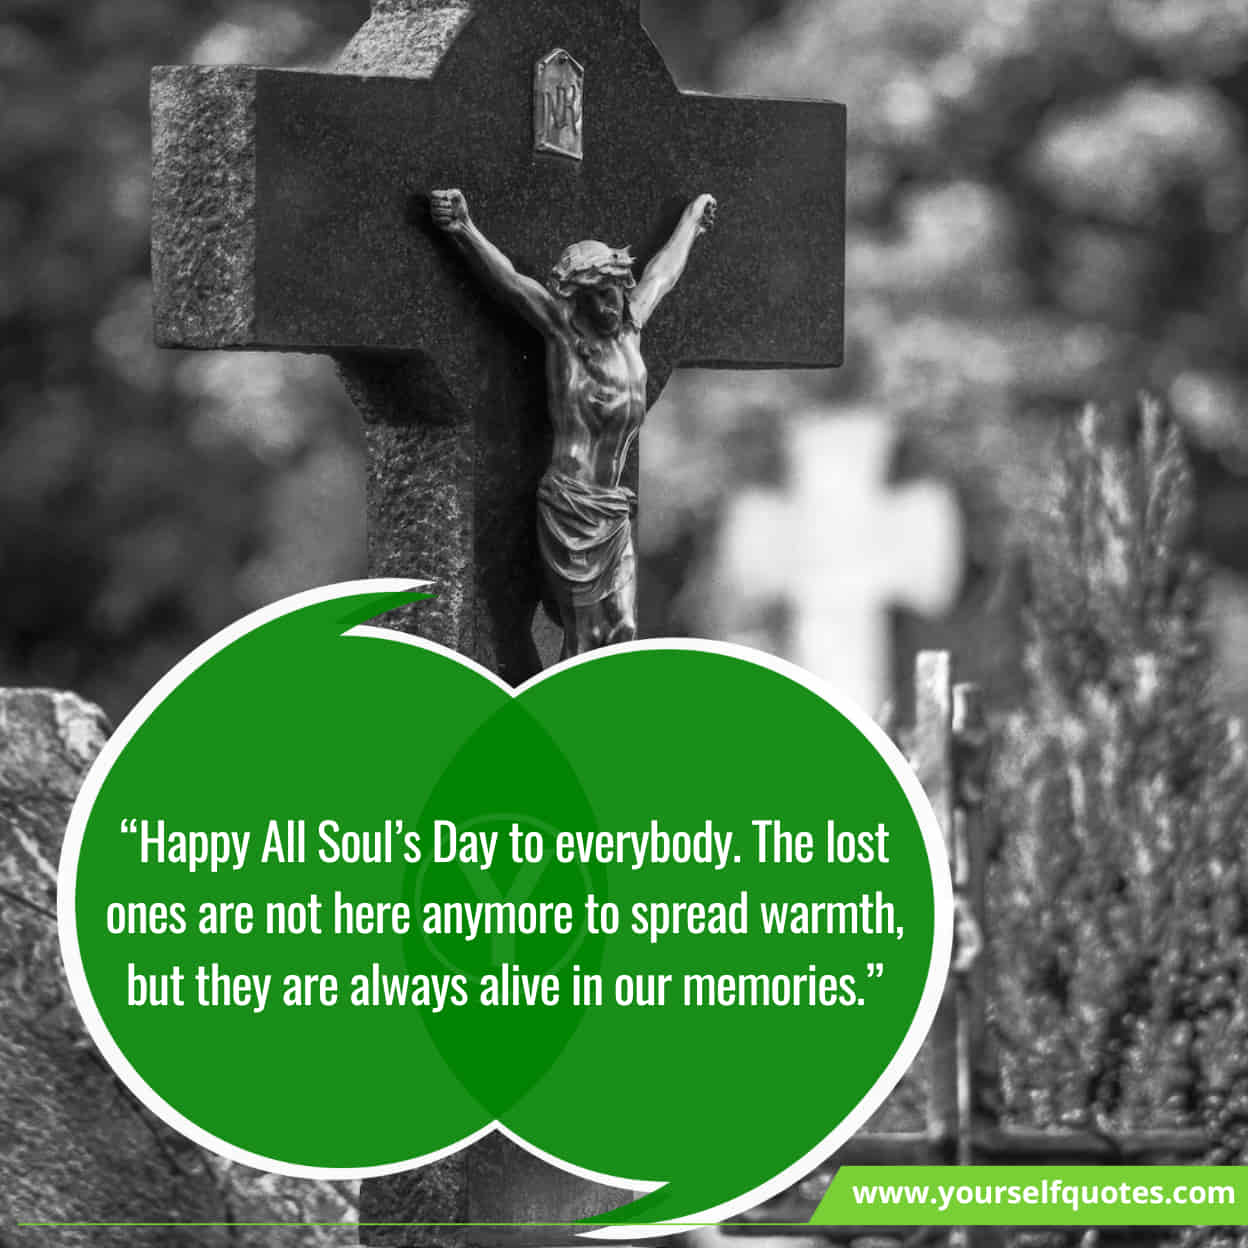 Best Exciting Wishes, Quotes For Happy All Souls Day